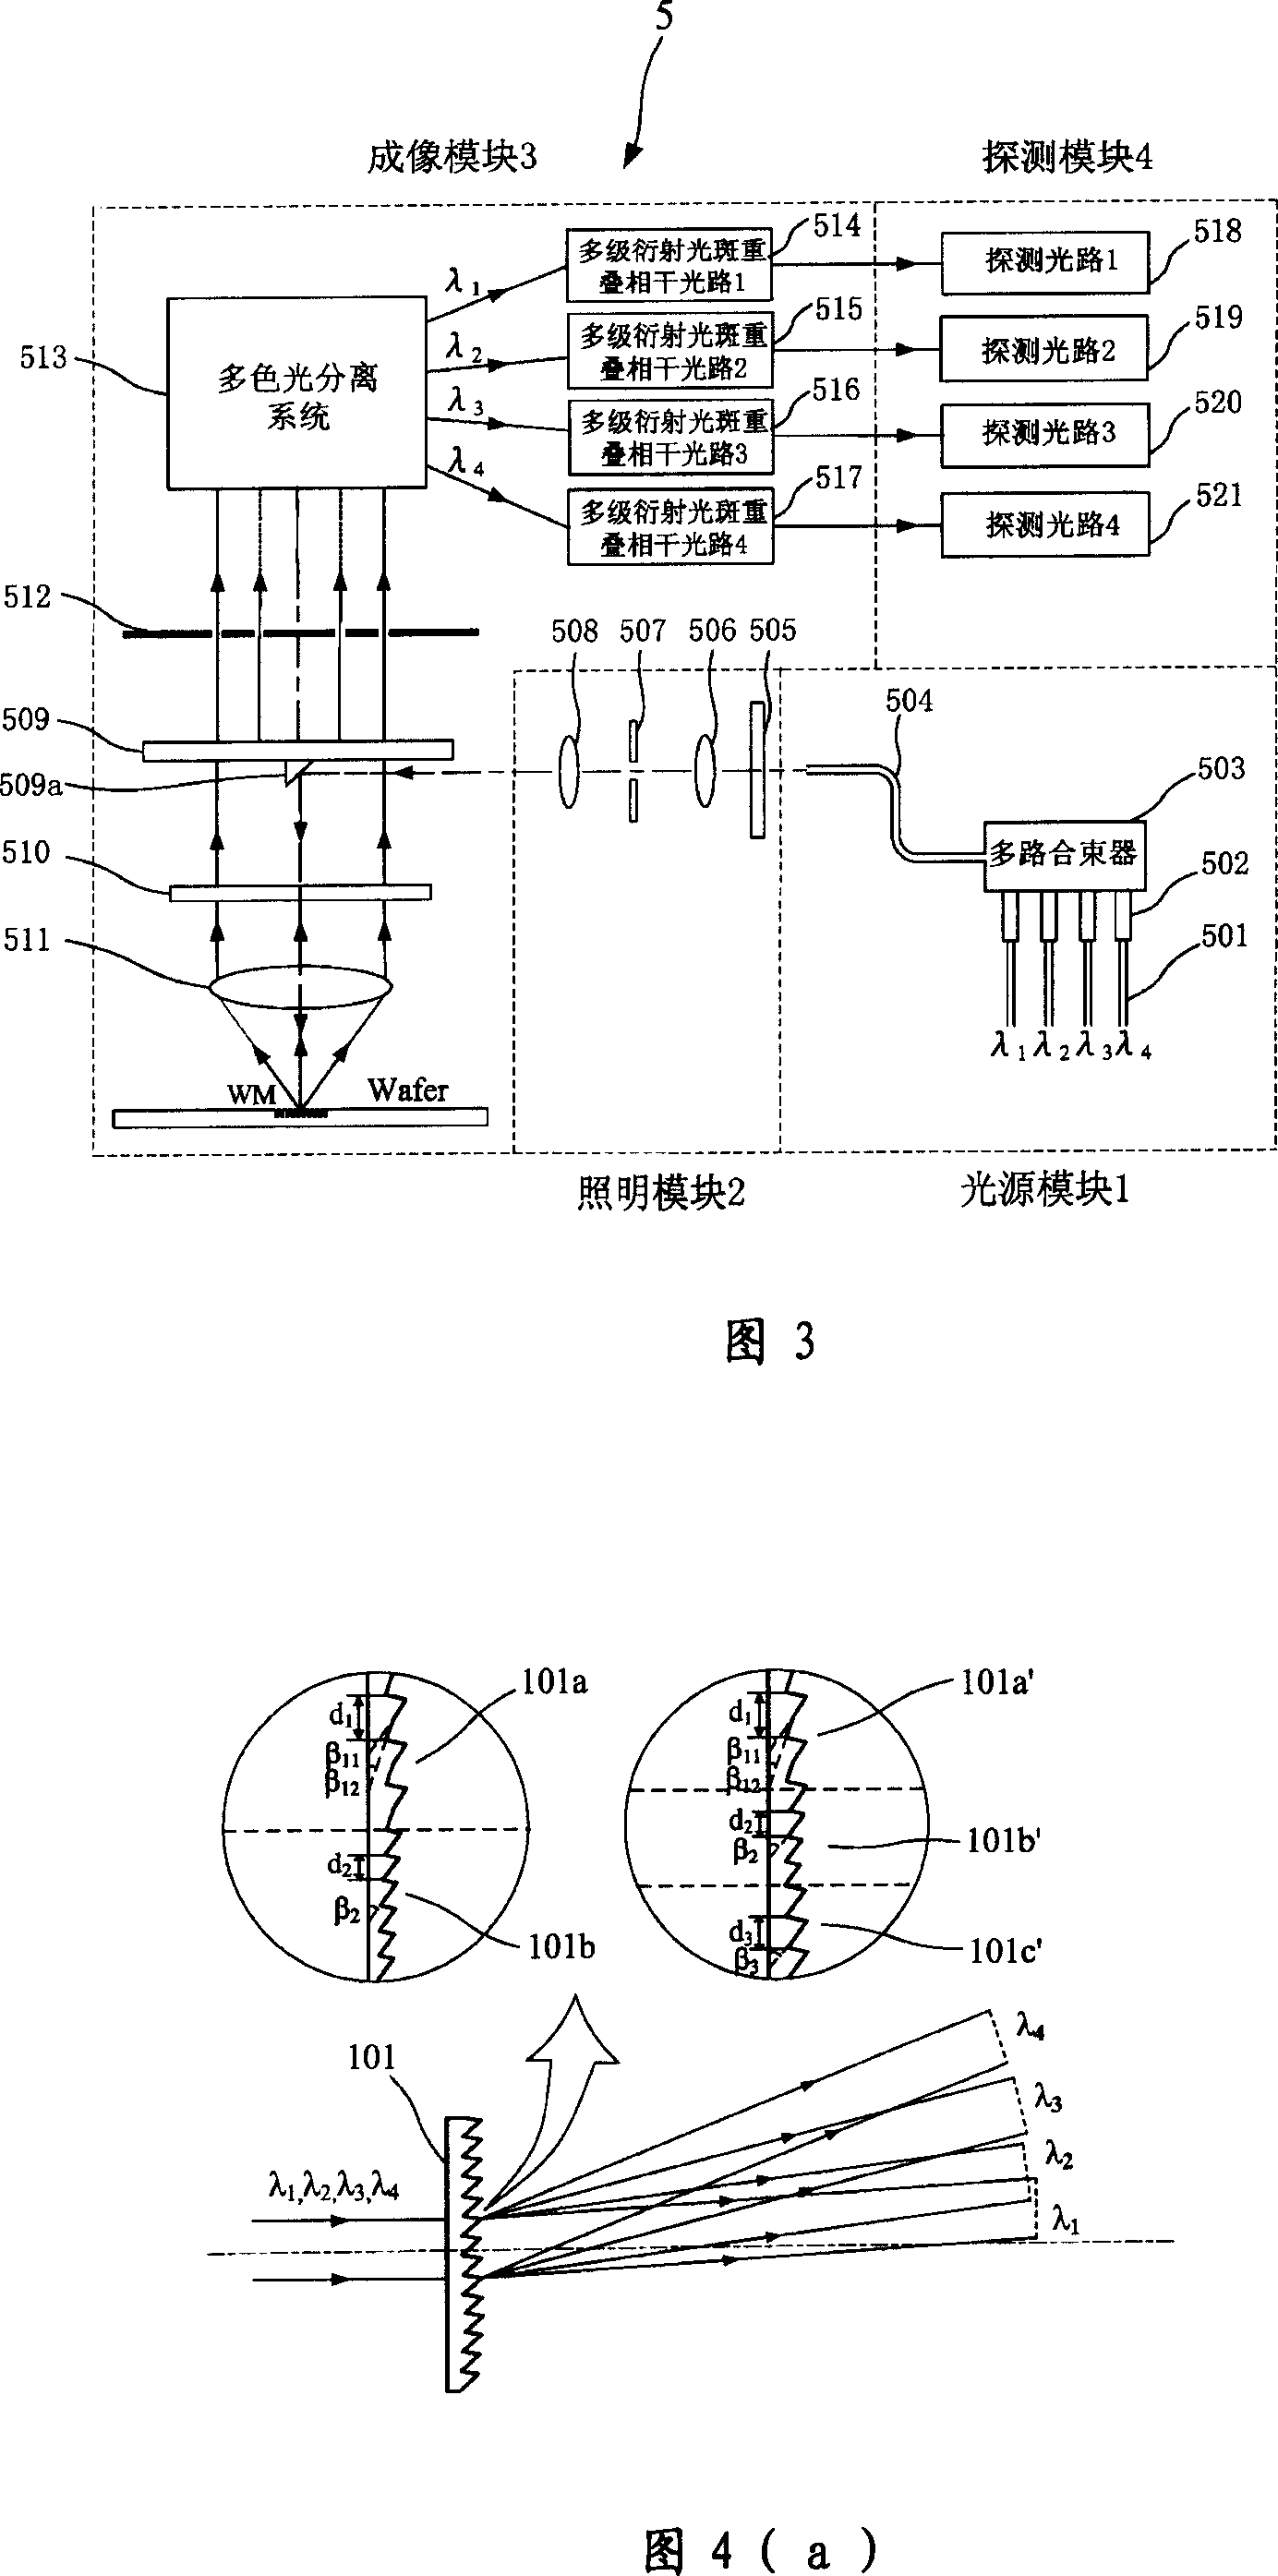 Alignment system for photoetching device and stage jointing grating system